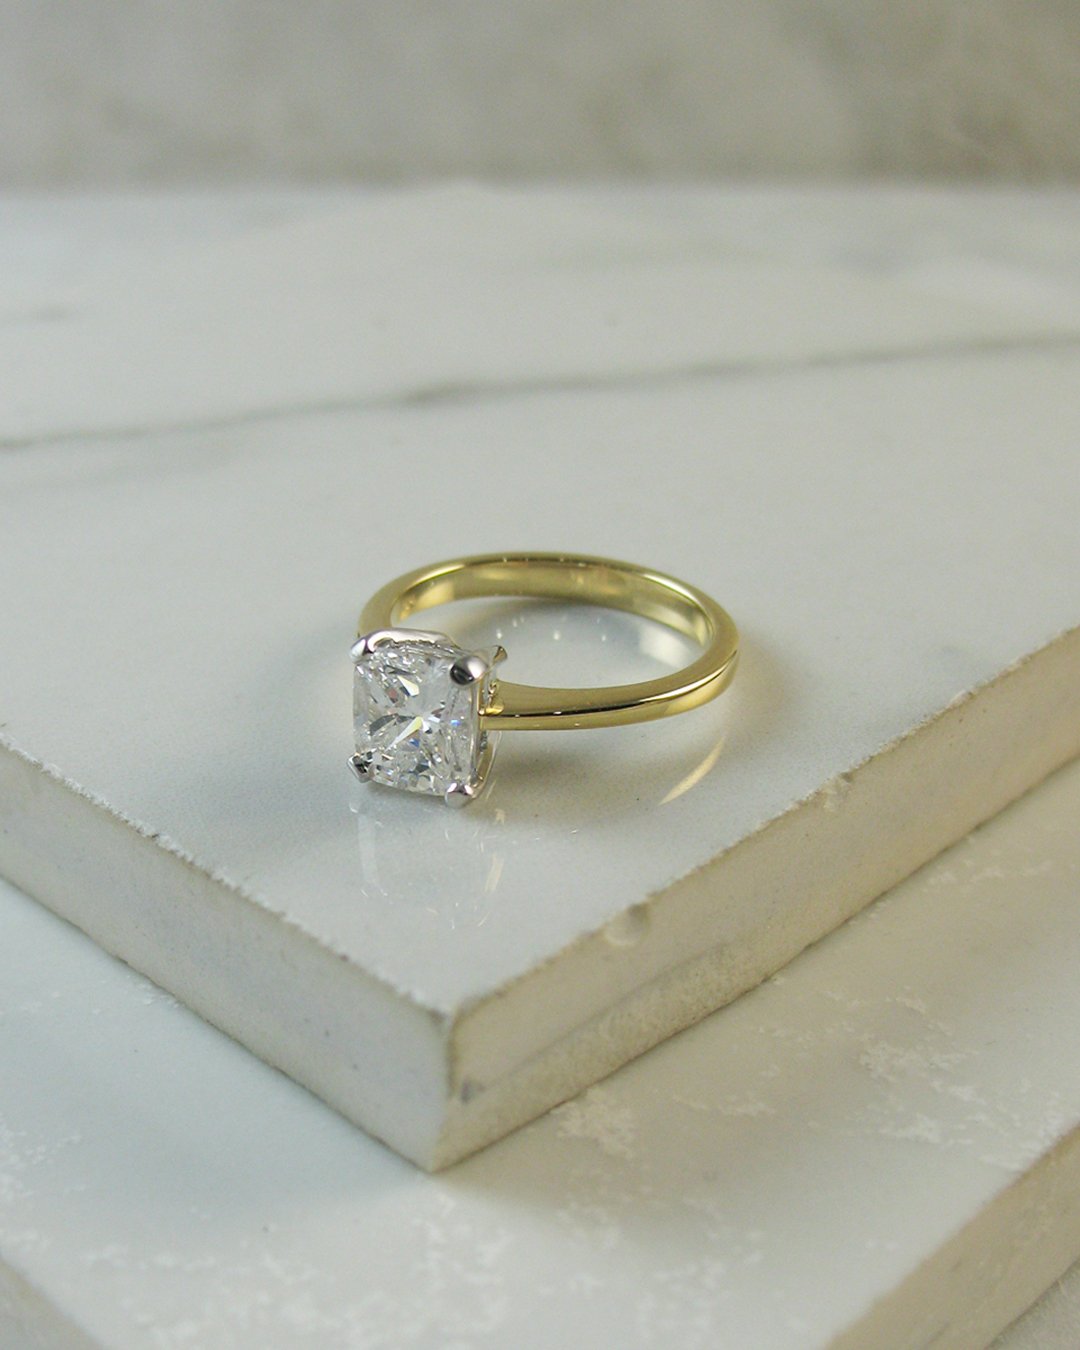 A gentle rounded corner solitaire engagemnet ring